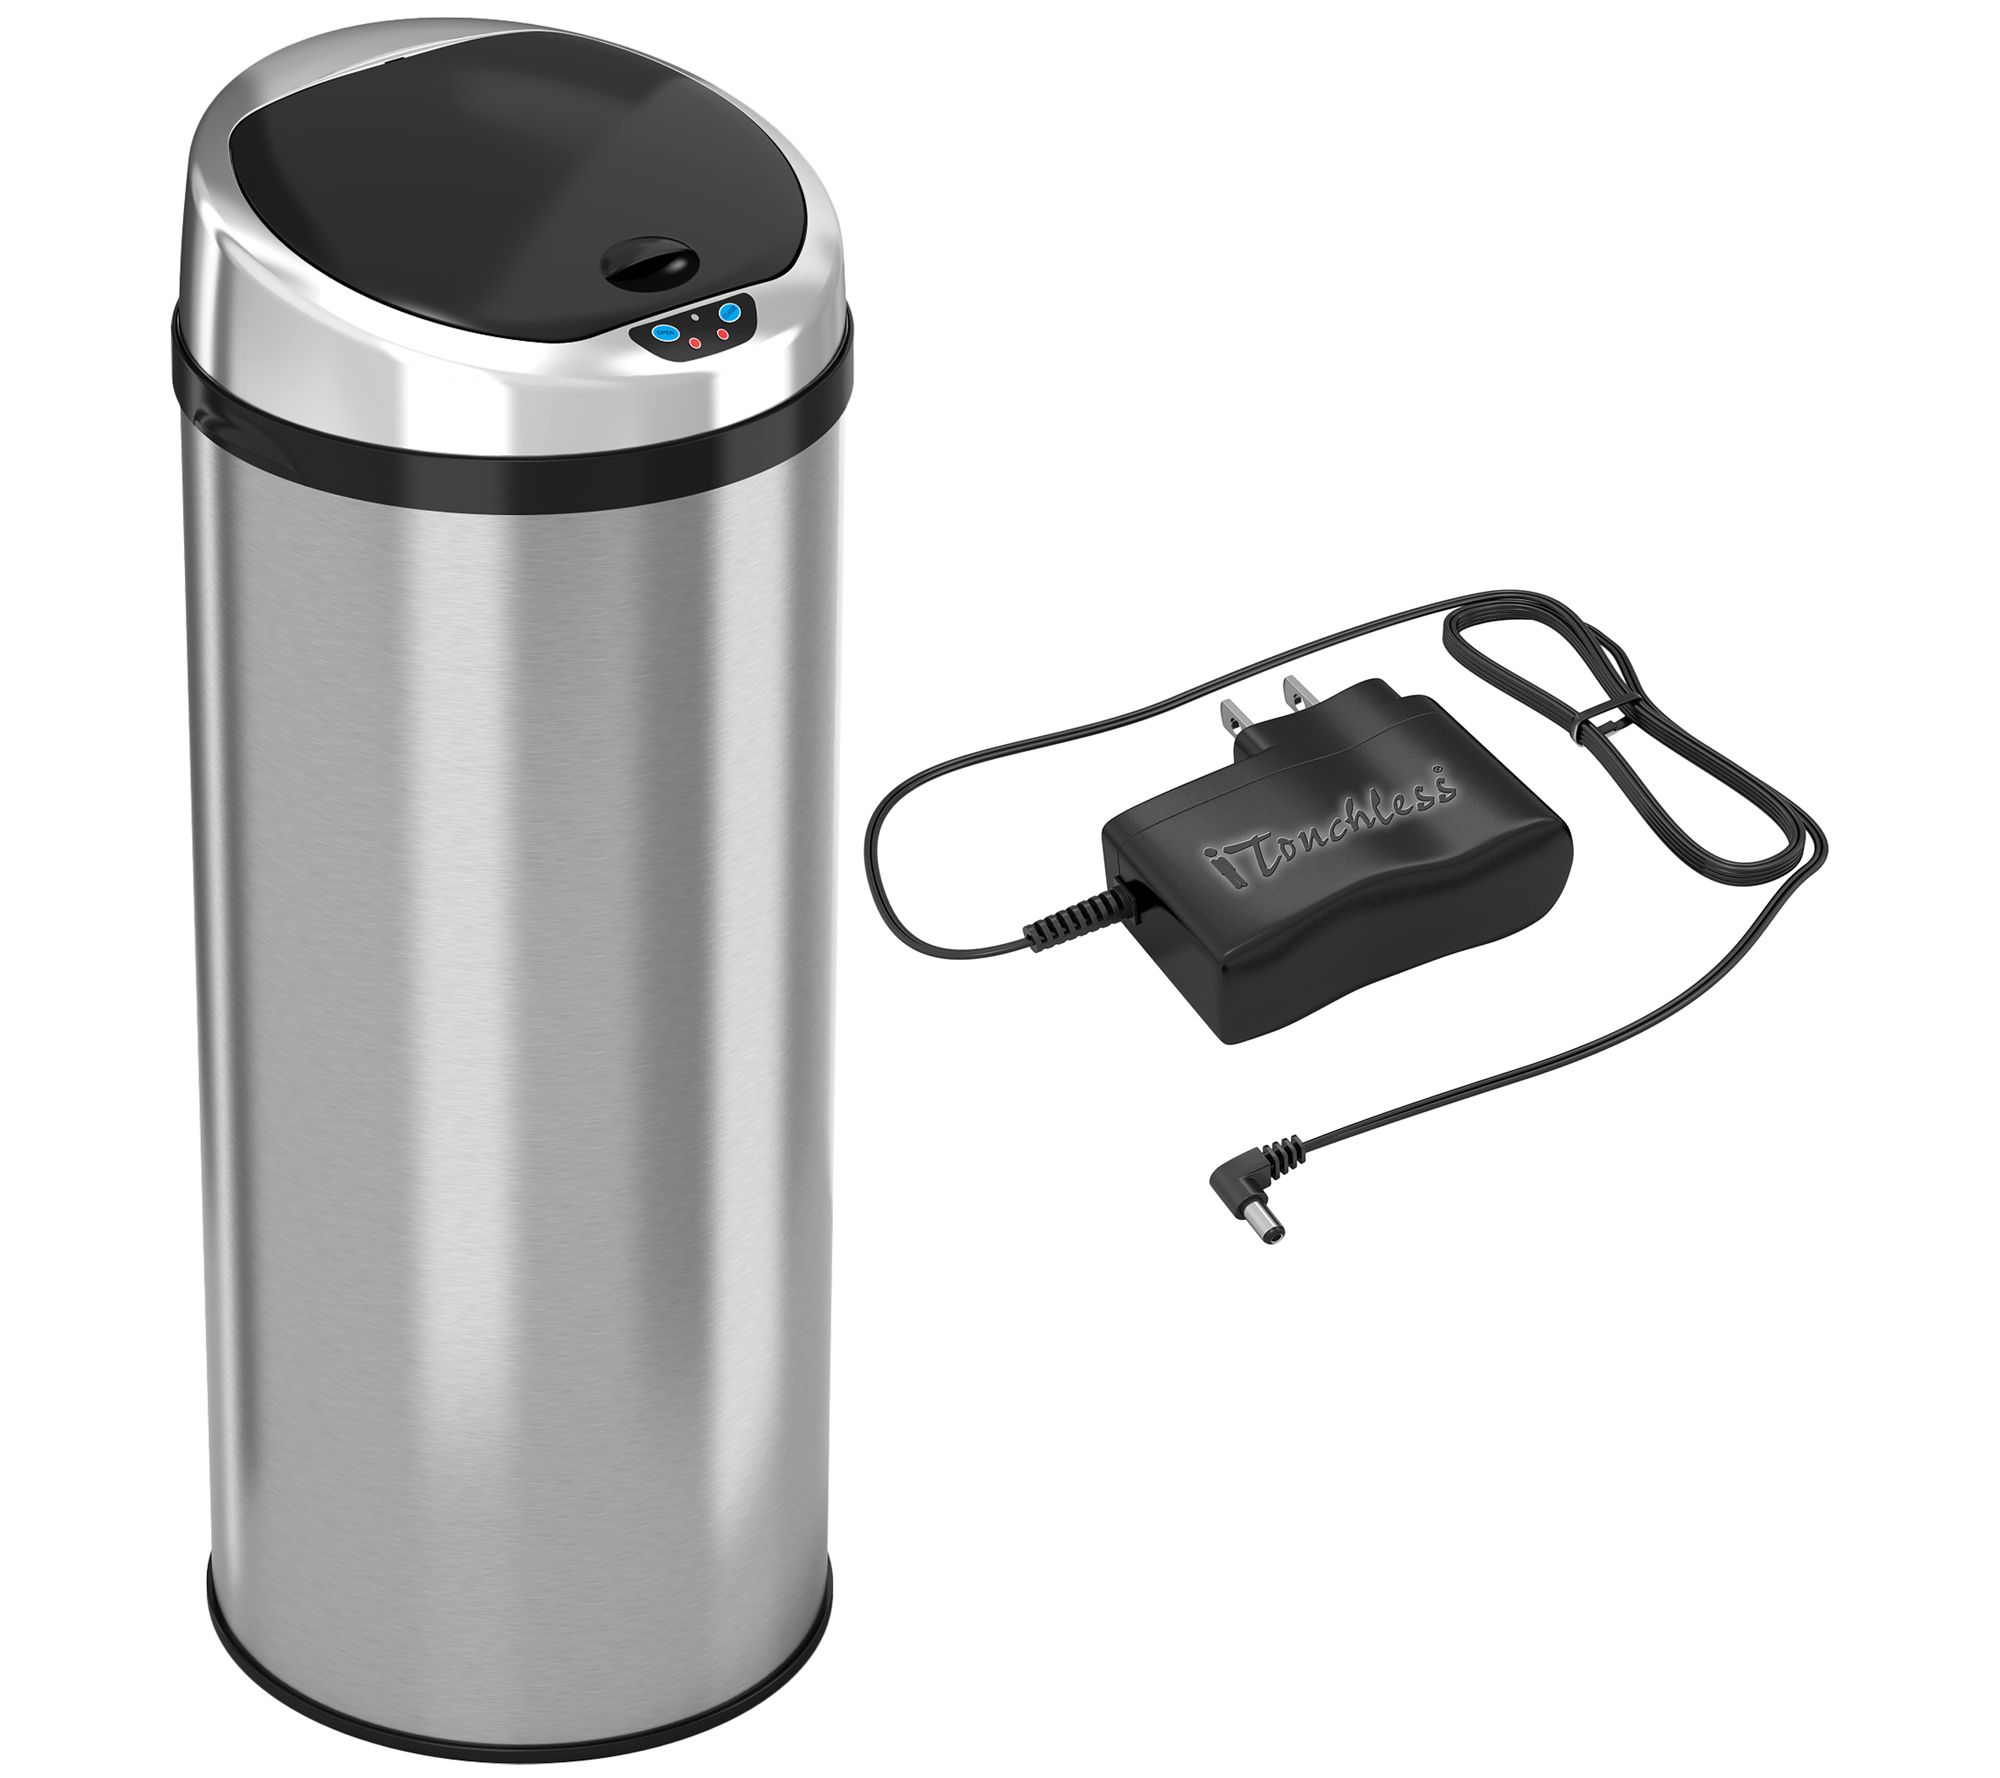 Nine Stars 21 Gallon Trash Can, Touchless Dual-Function Kitchen Trash Can,  Stainless Steel 